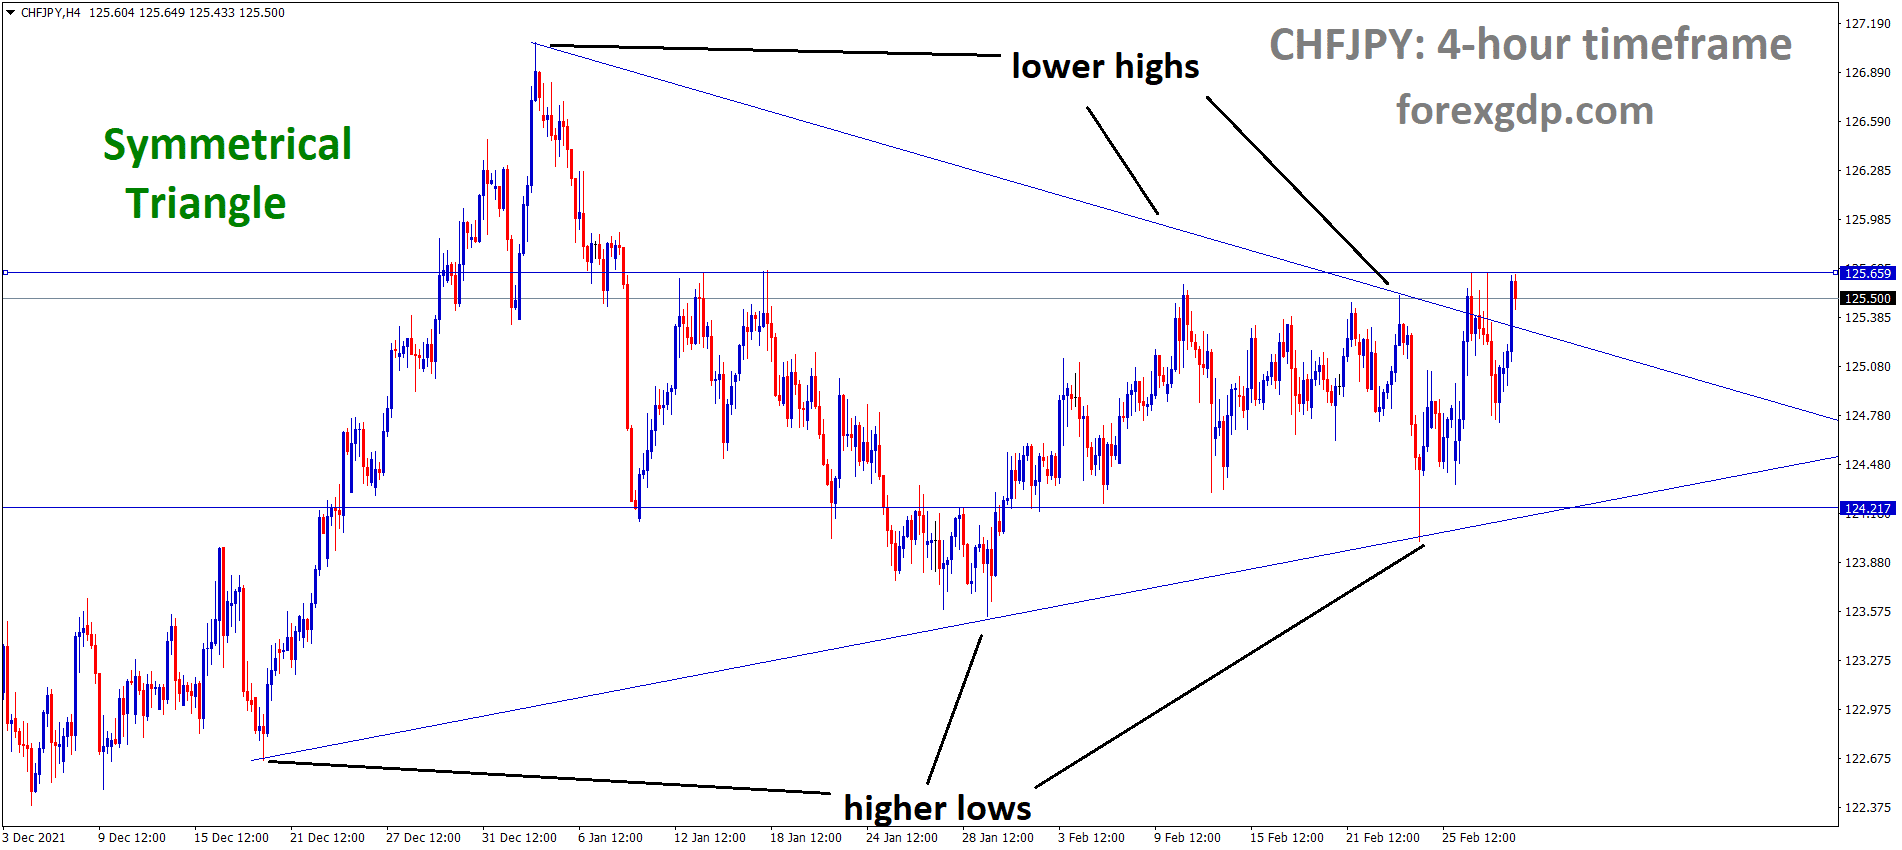 CHFJPY is moving in the Symmetrical triangle pattern and the market has reached the Top area of the pattern.